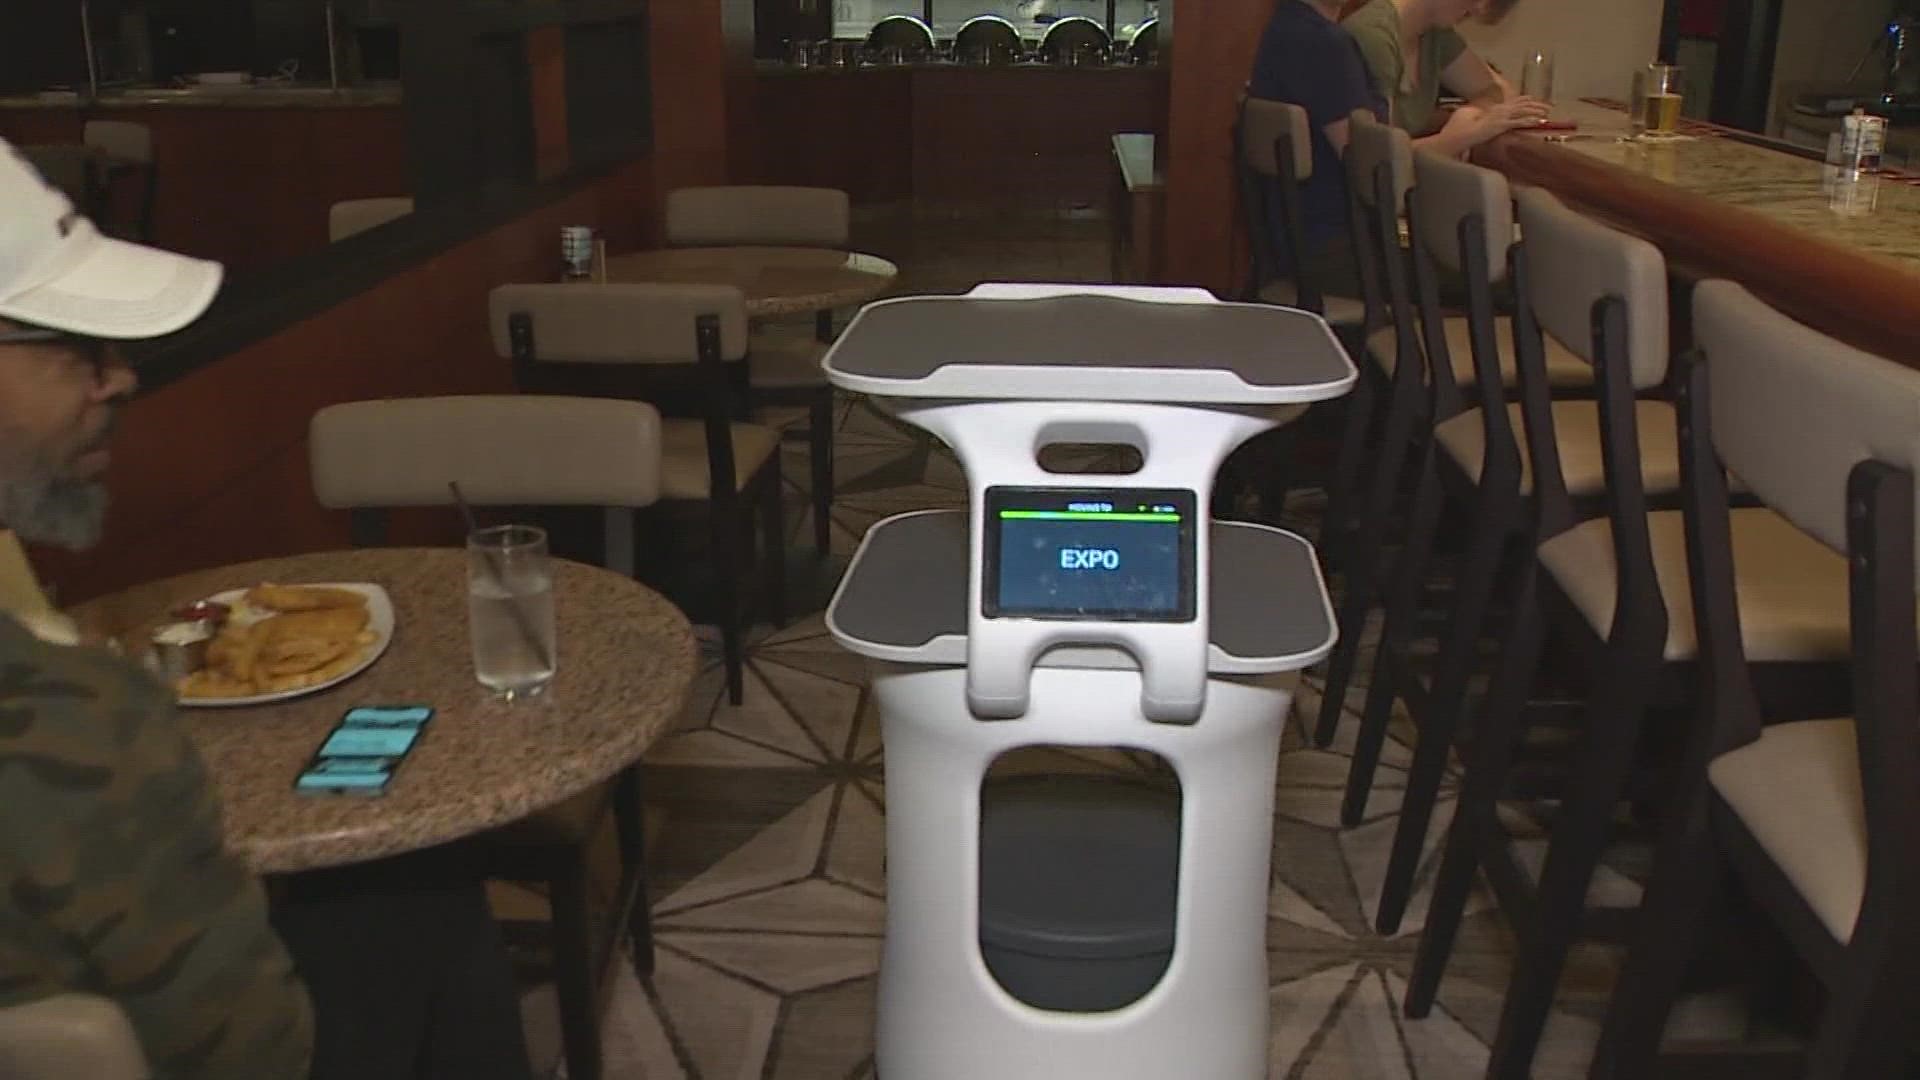 The University of Houston is testing a new research project they’re calling the "future of food service."